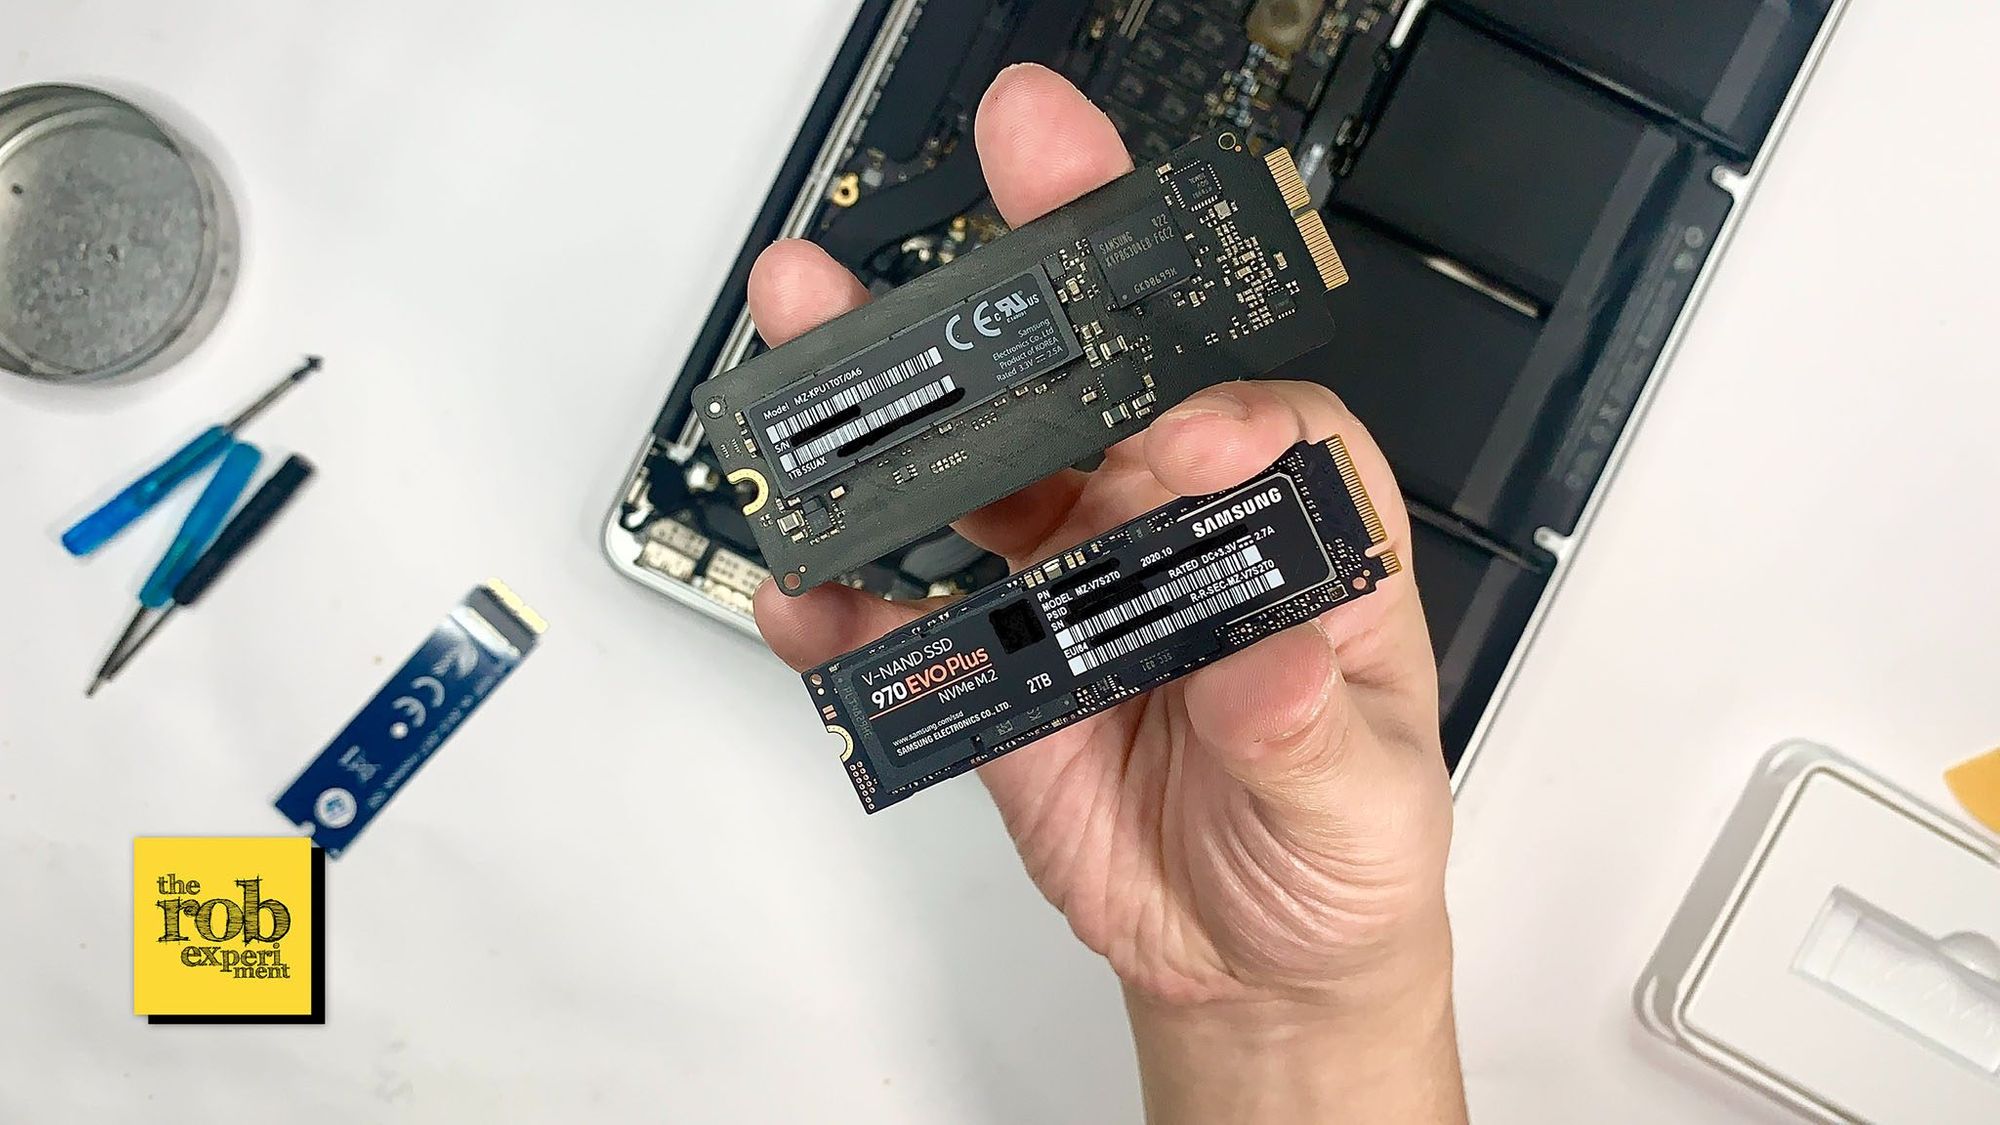 tea Disappointed each Upgrade Macbook Pro 15″ 2014 SSD To NVMe—Part 2: The Upgrade